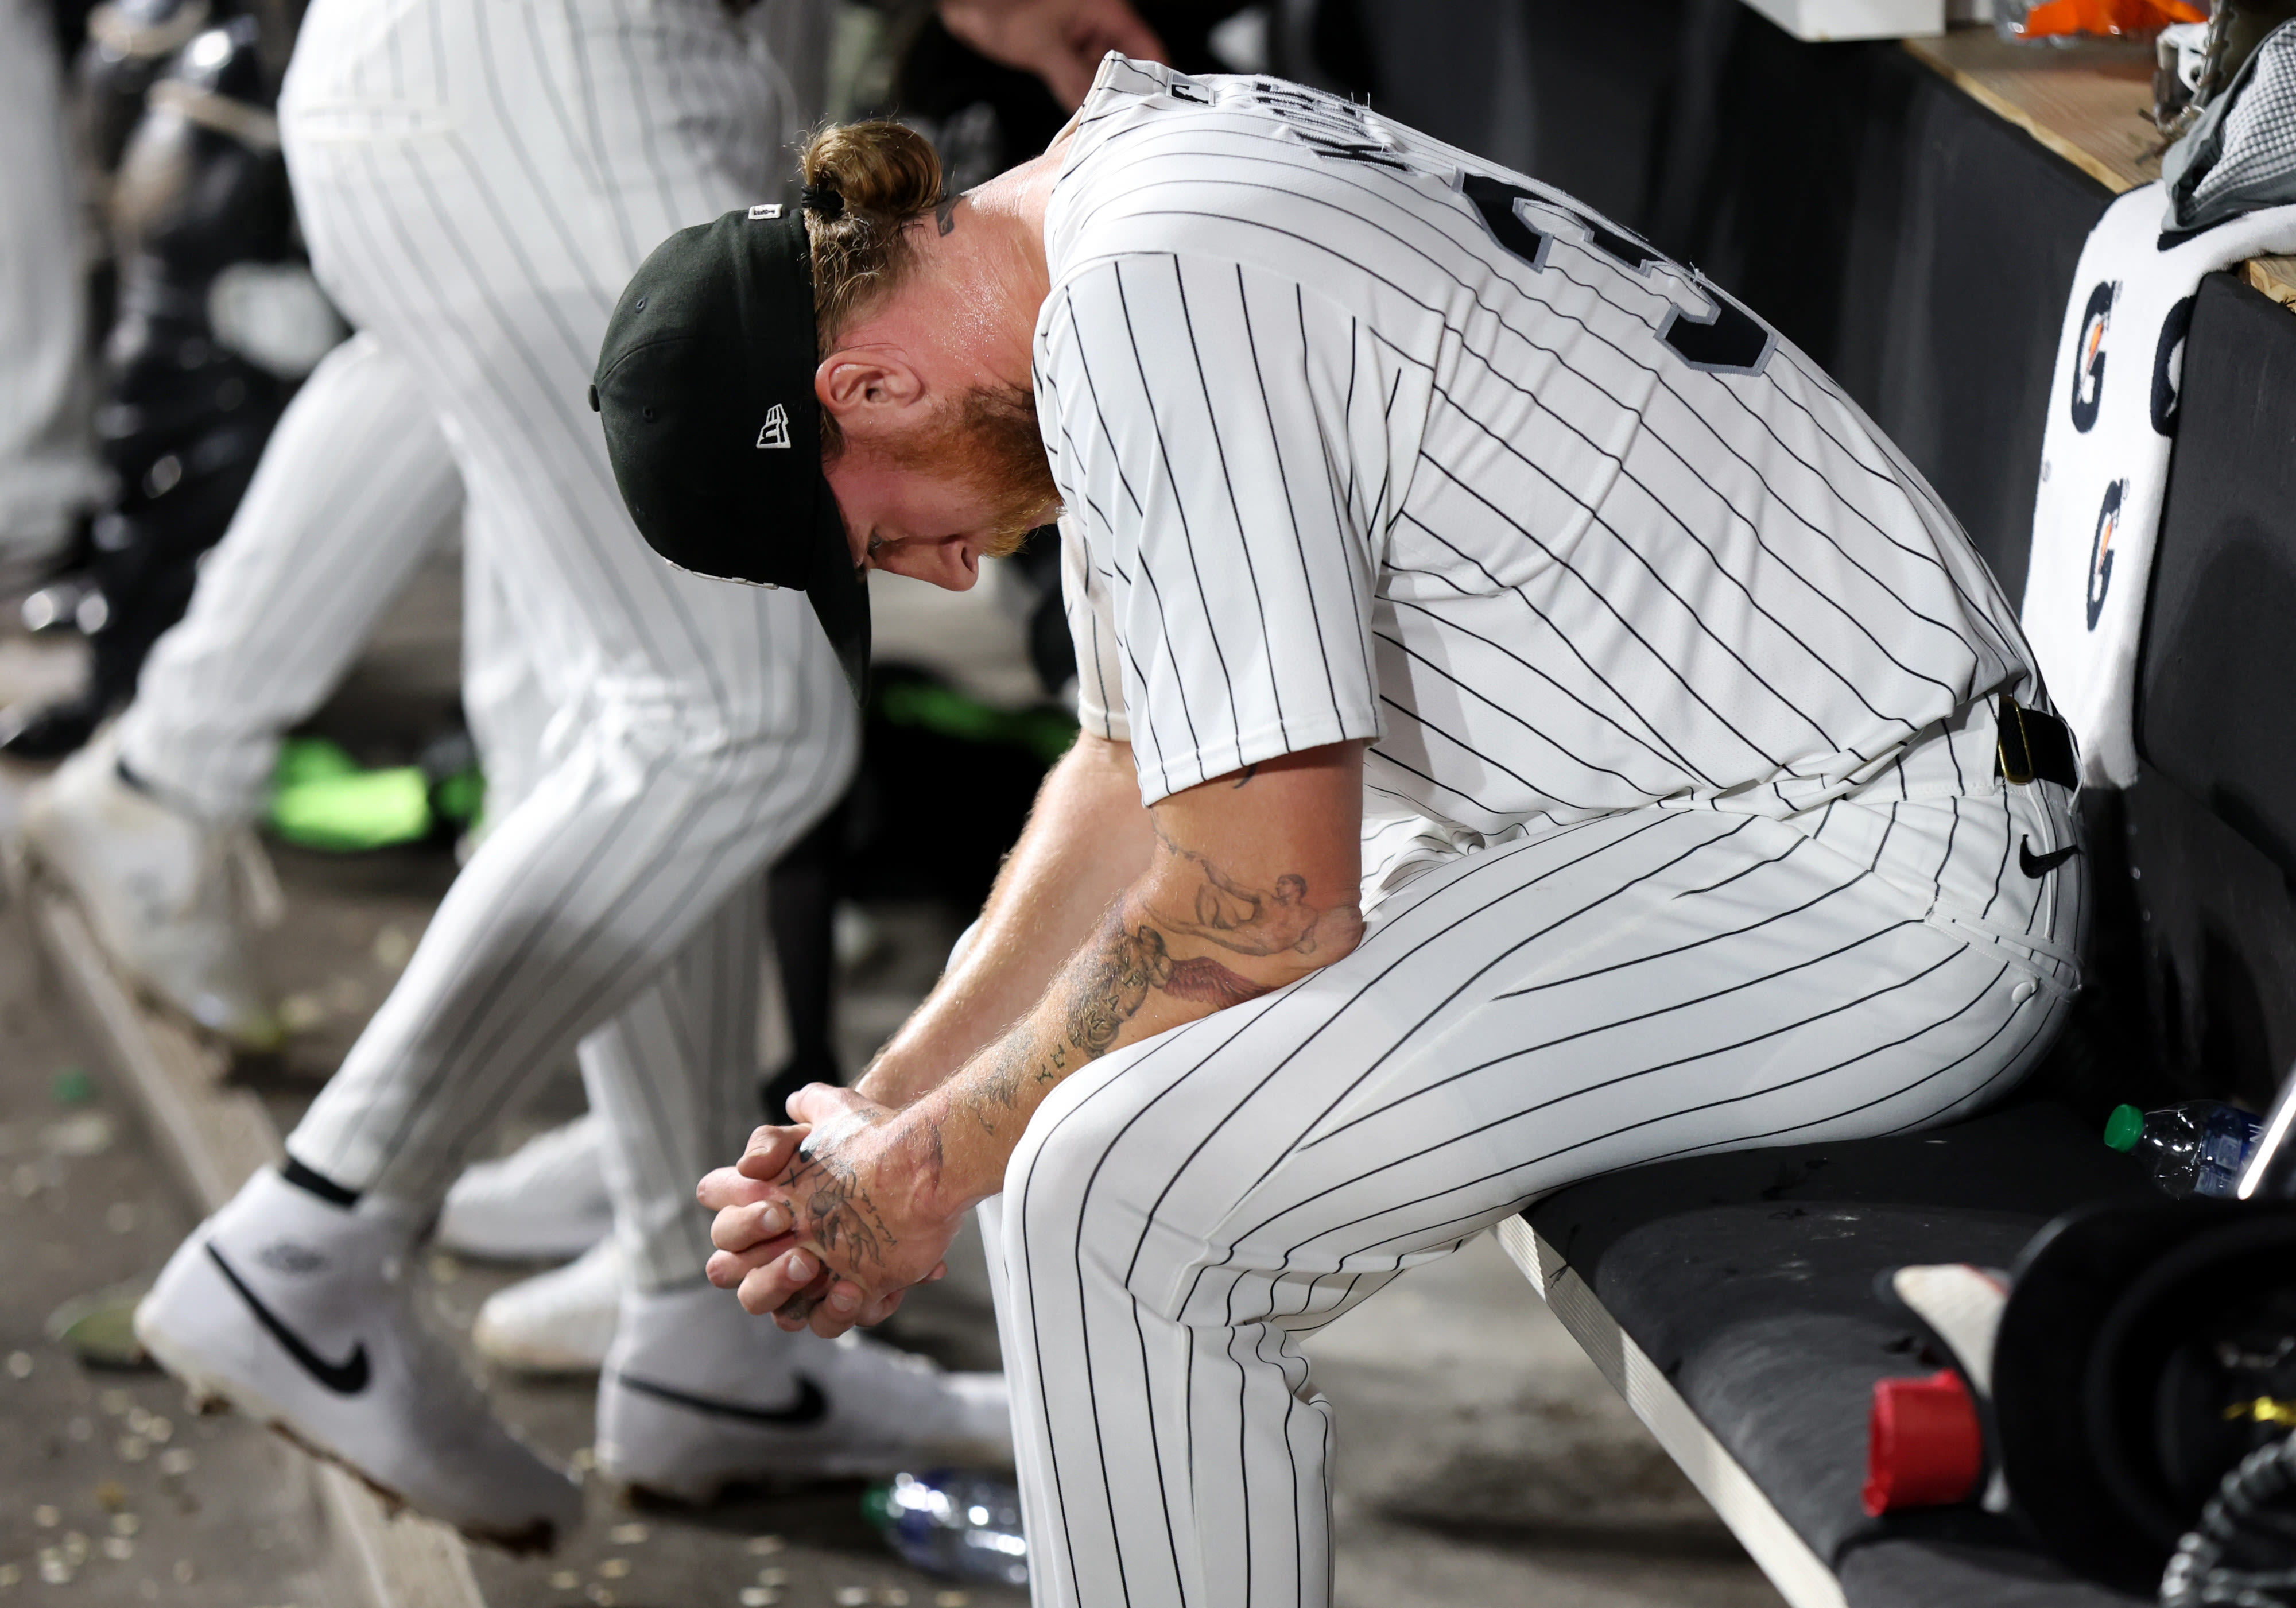 ‘Another heartbreaker’. Chicago White Sox lose to drop to 6-24 — the worst winning percentage in MLB.